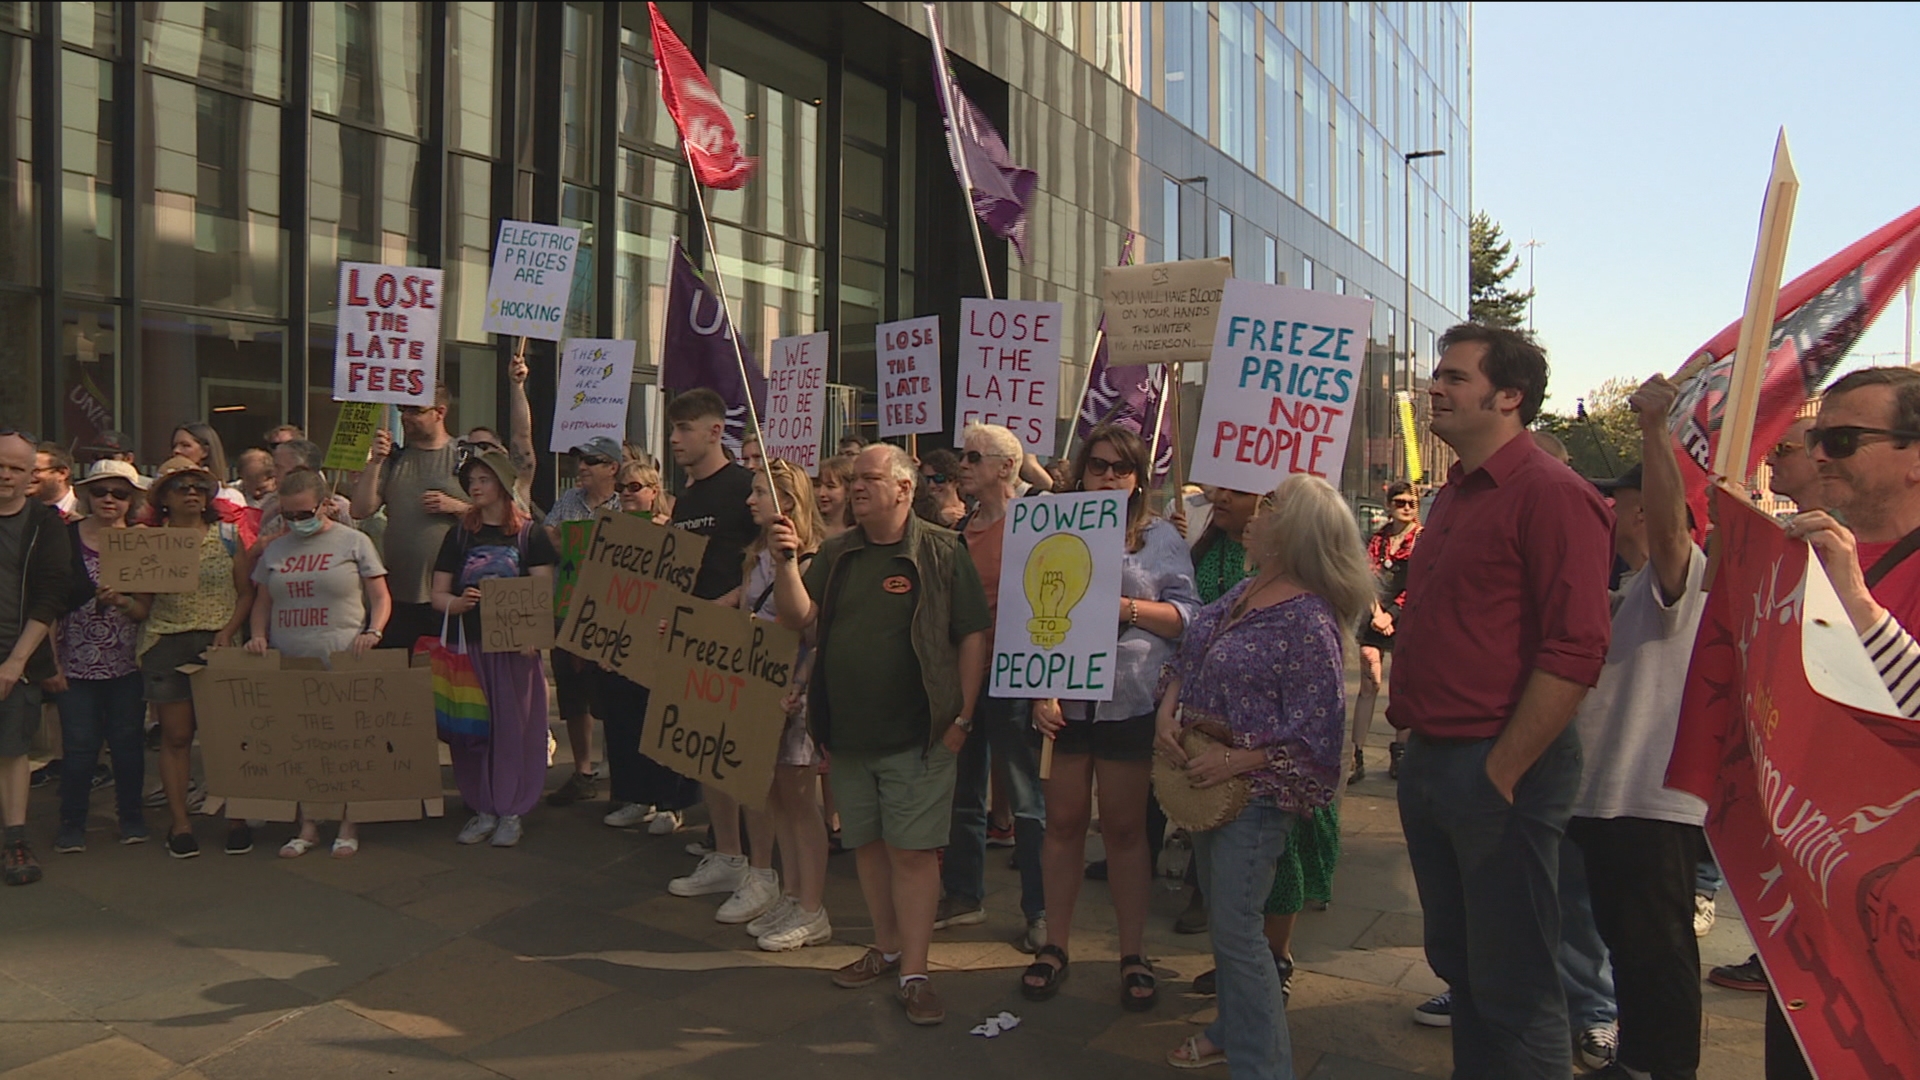 Protesters gathered outside the Scottish Power HQ in Glasgow.